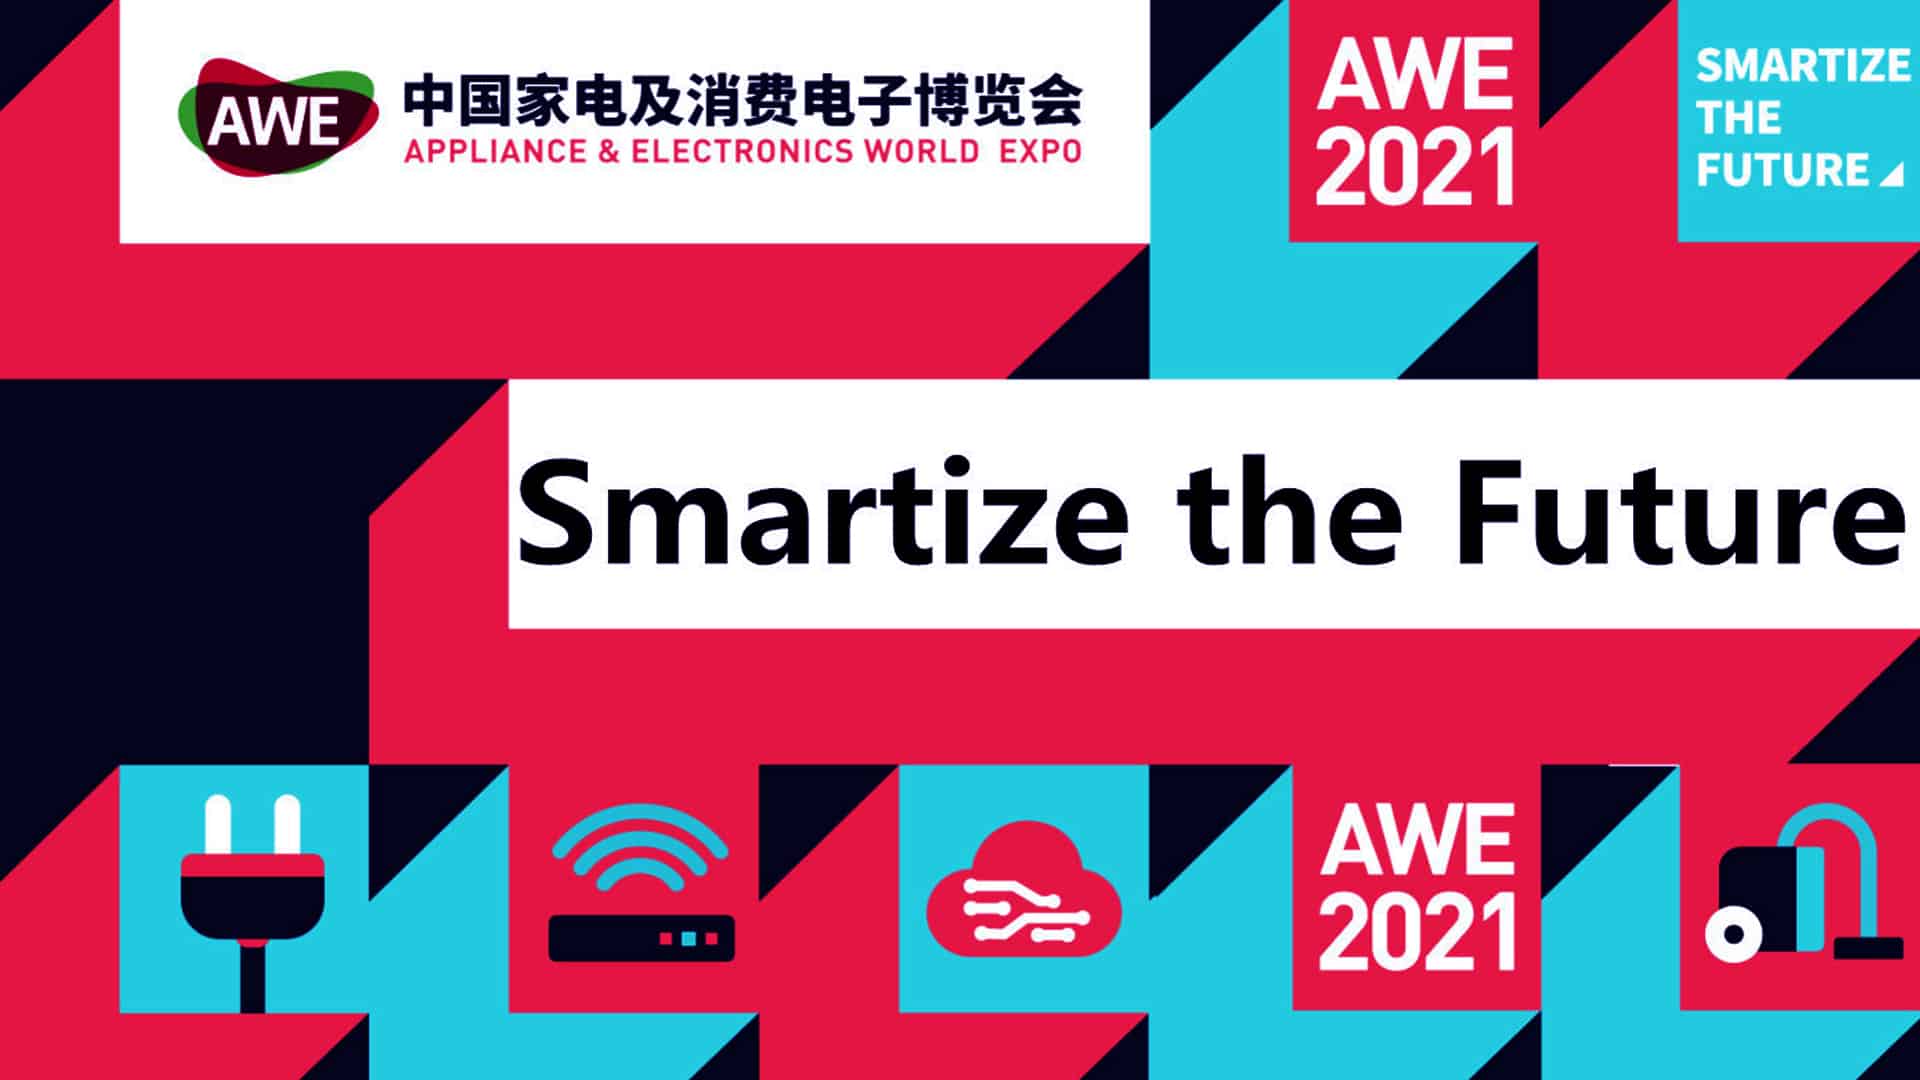 AWE2021- Latest applications of Cloud-to-cloud interconnection project unveiled in China